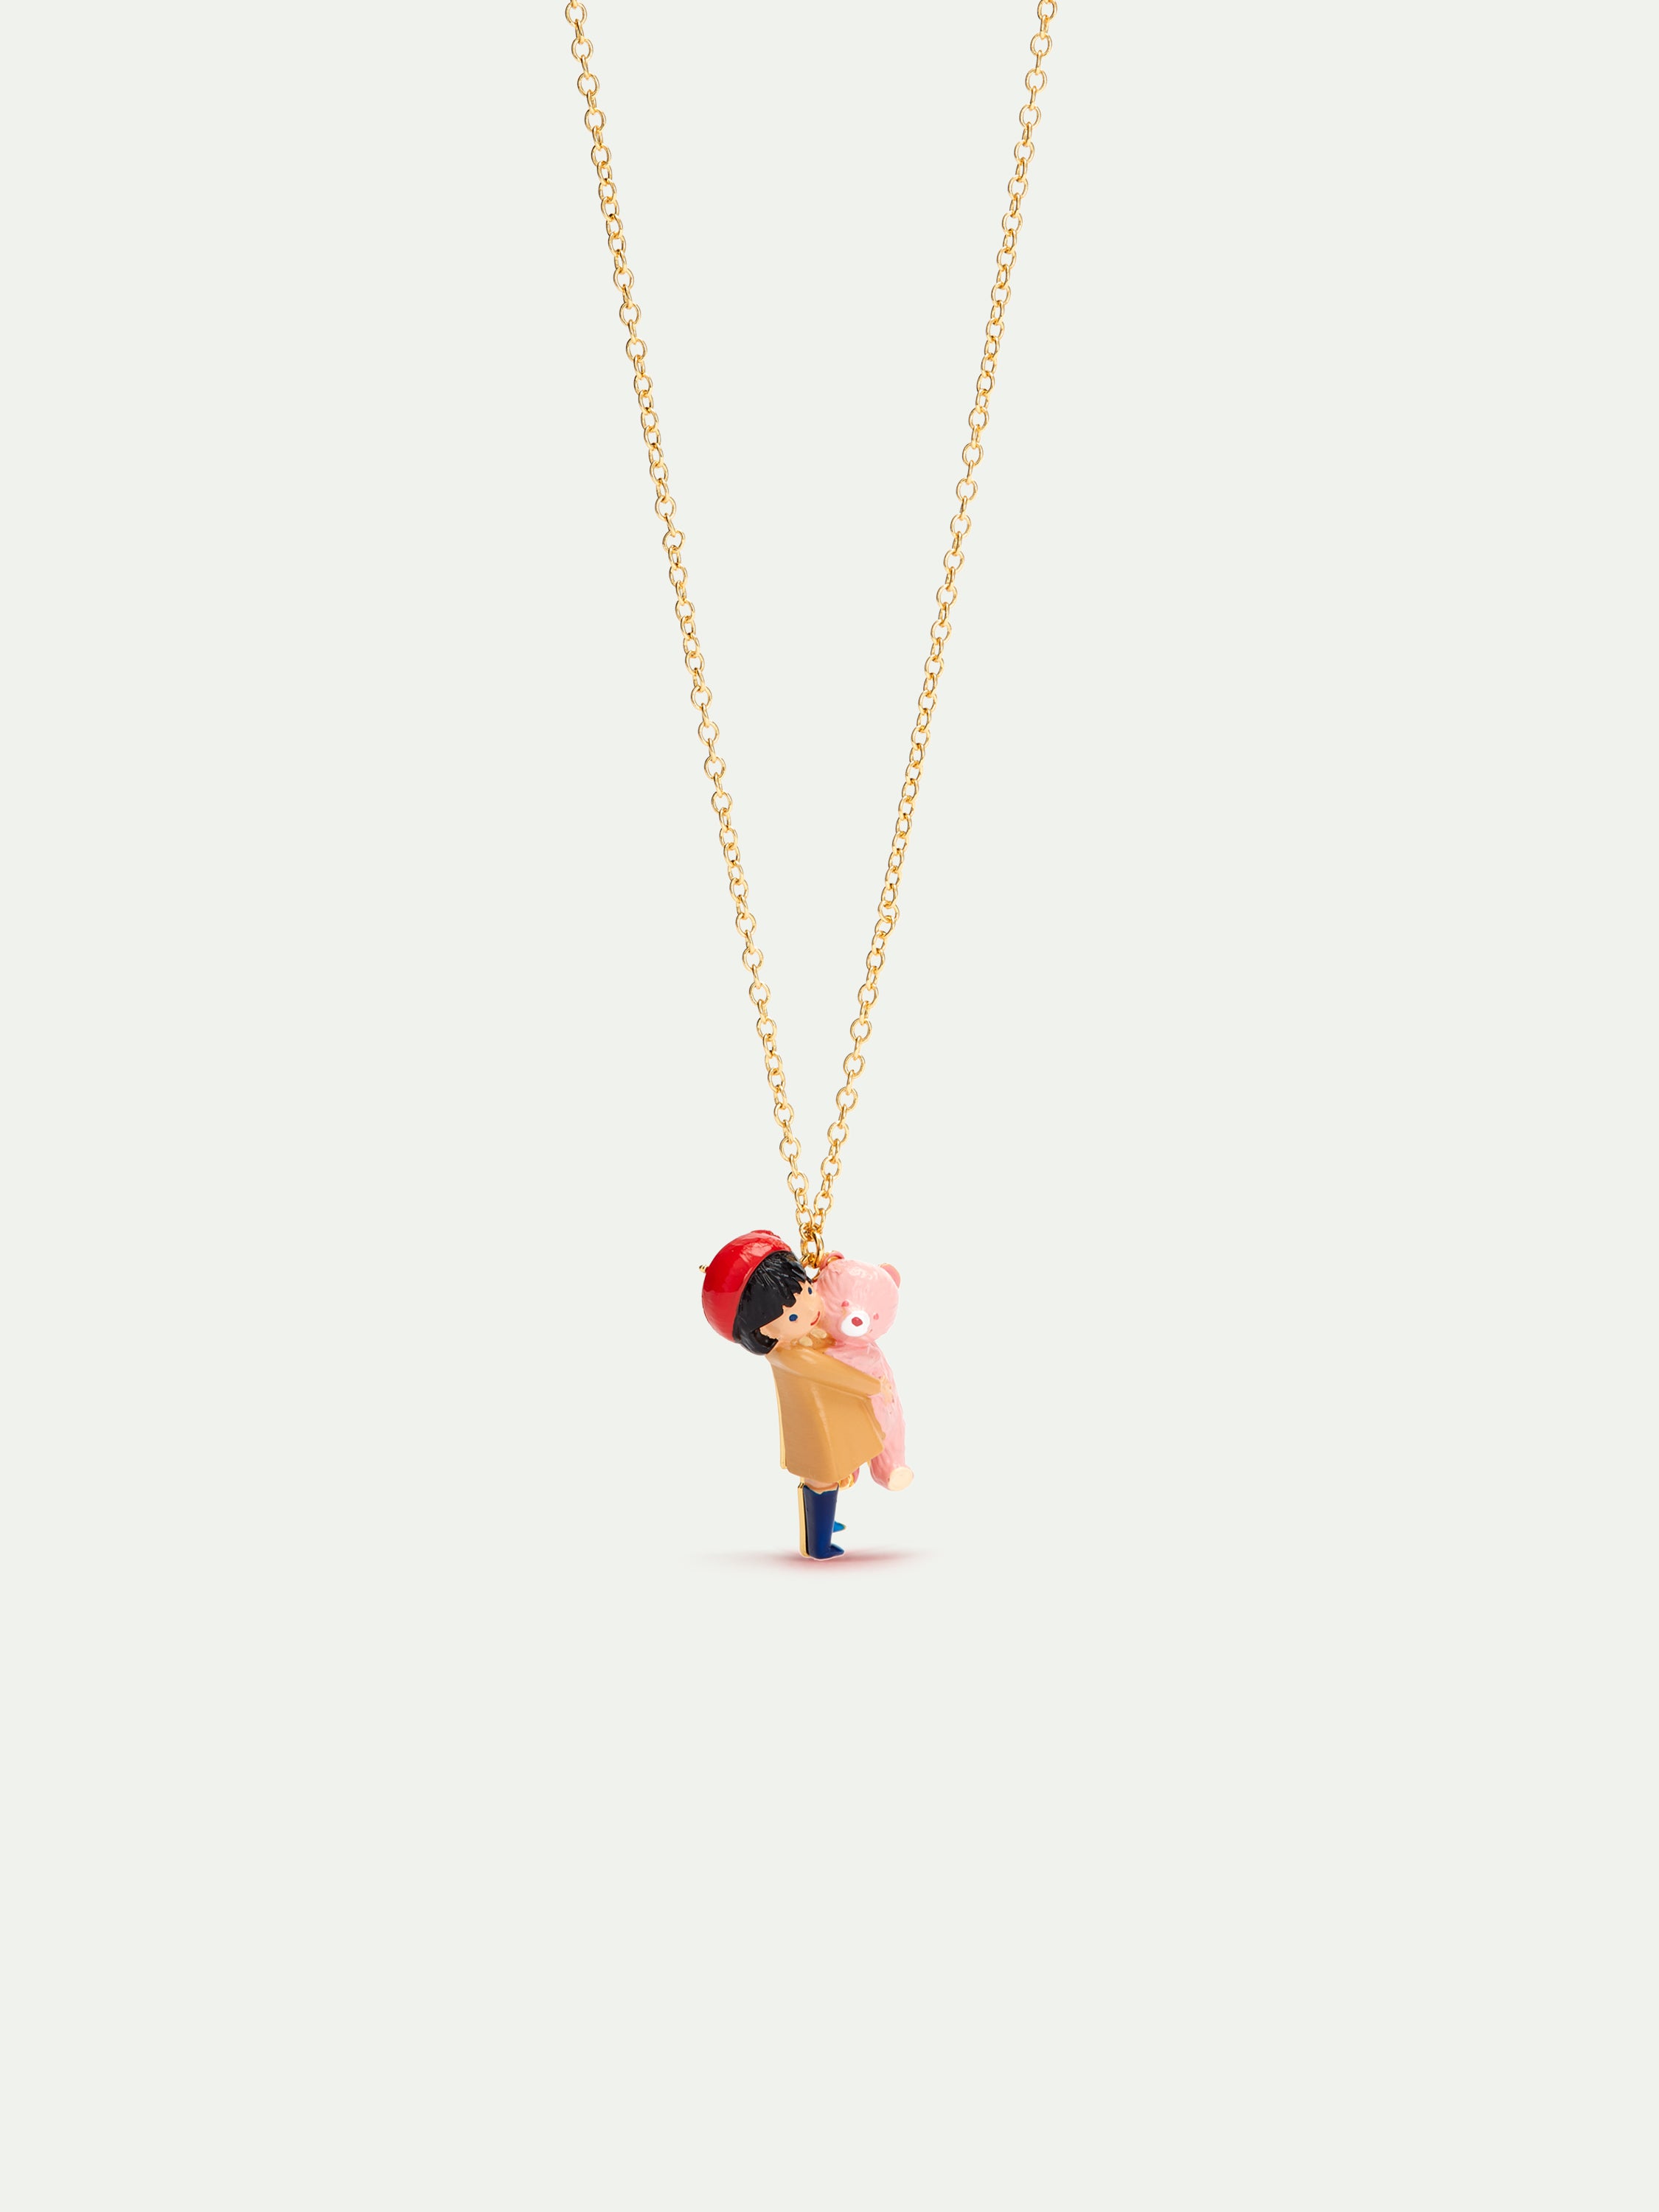 Little girl and teddy bear pendant necklace